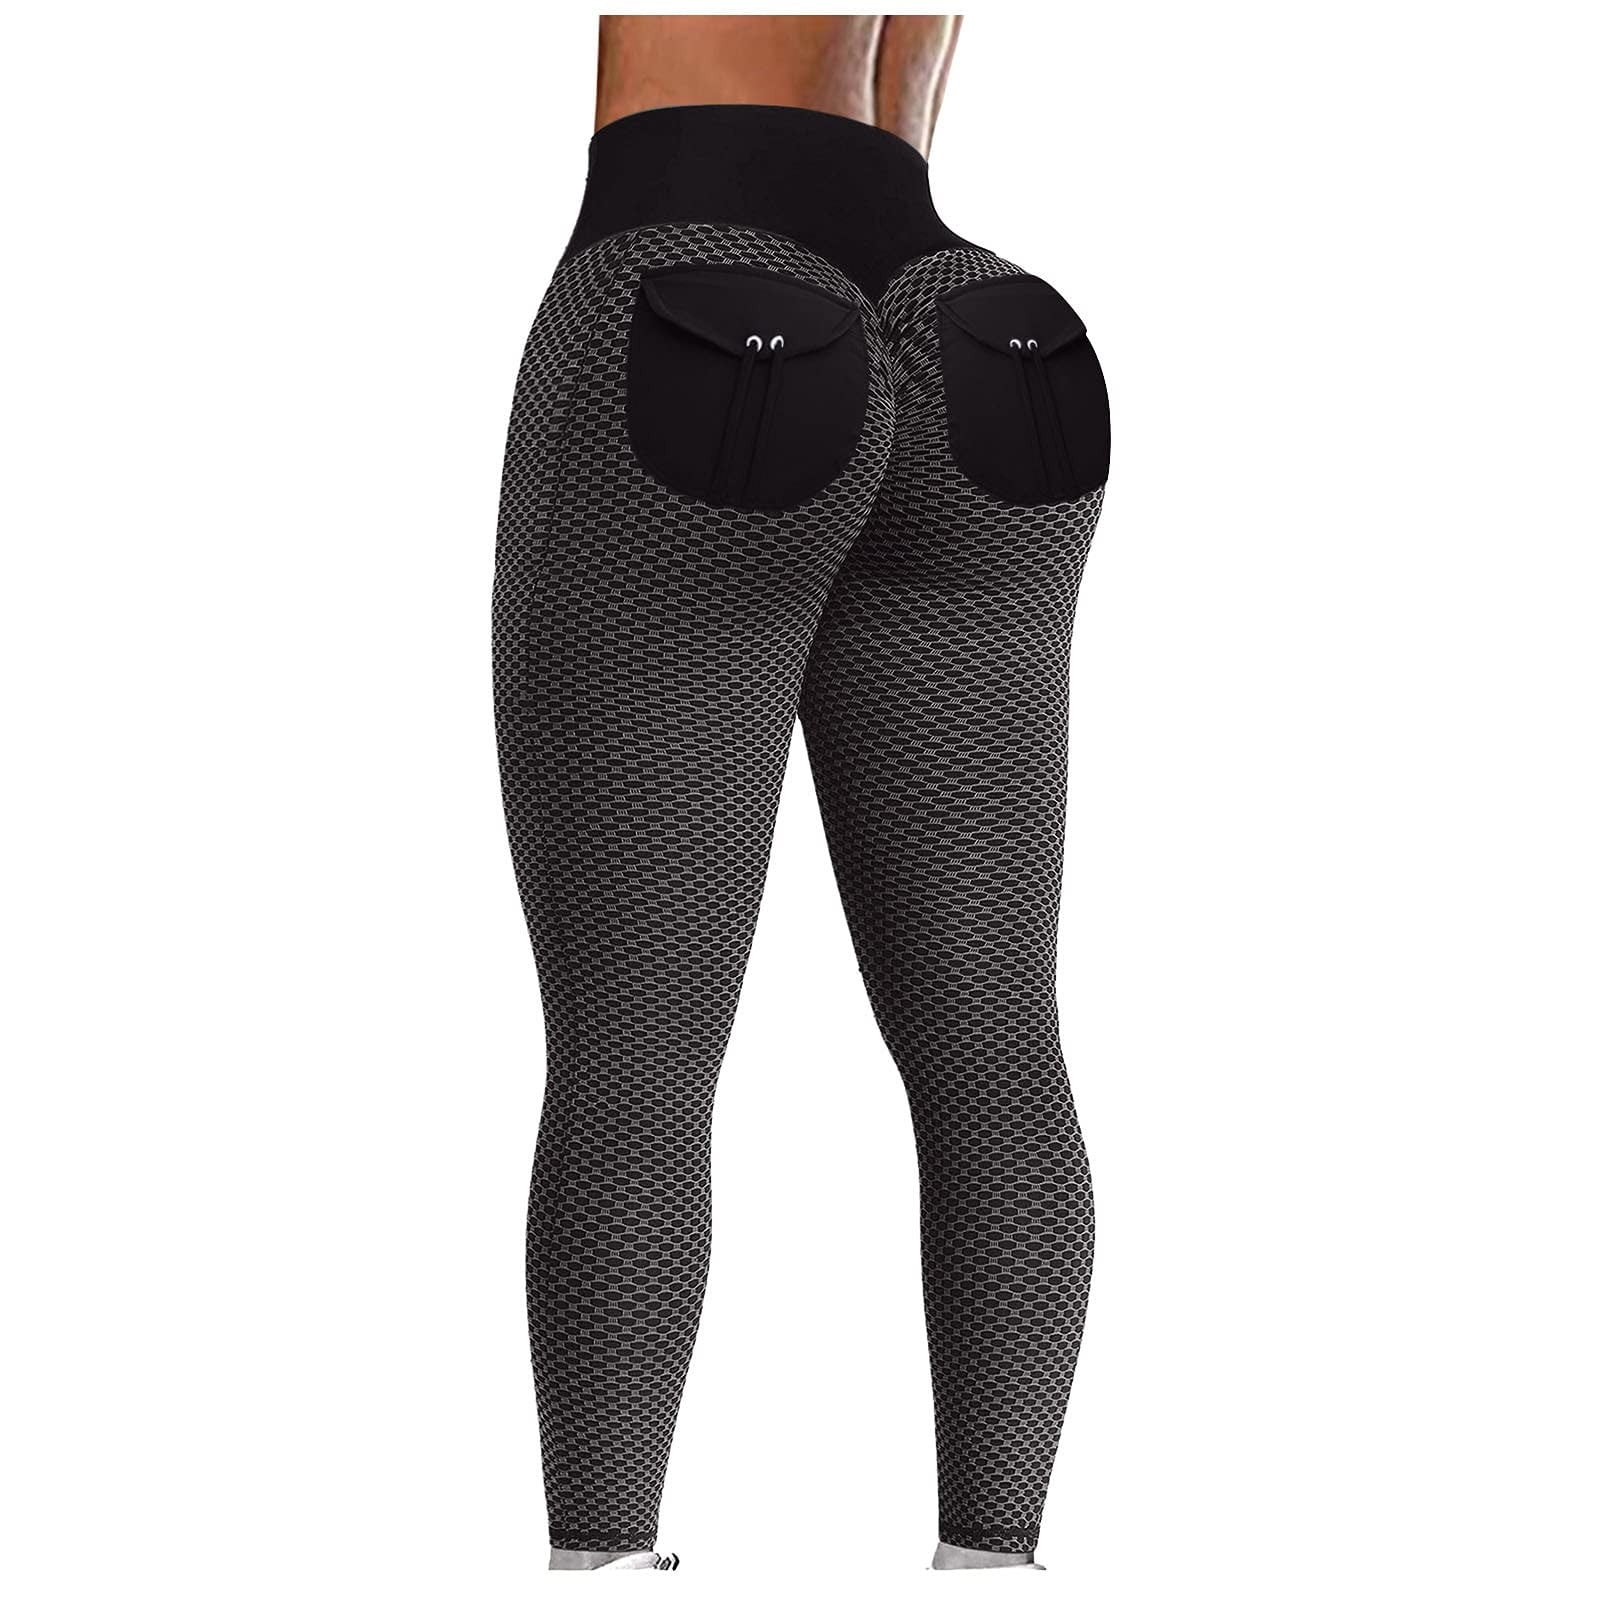 Juebong Workout Leggings for Women, Squat Proof High Waisted Yoga